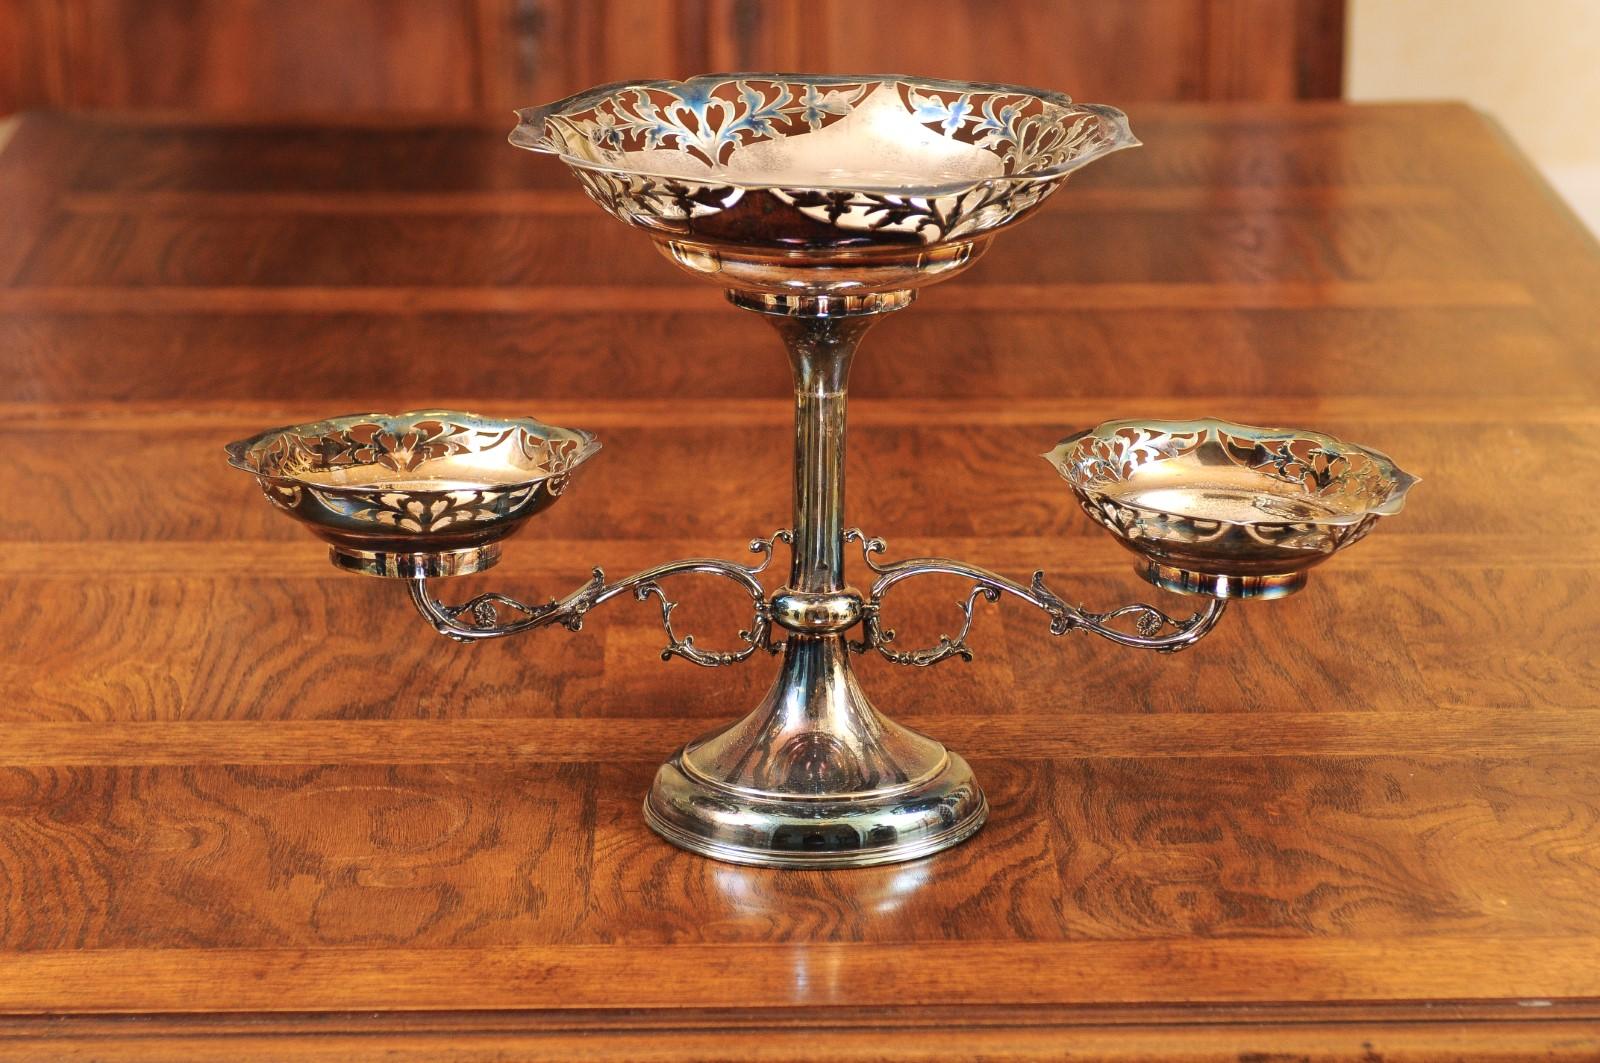 French 19th Century Silver Epergne with Pierced Foliage and Scrolling Motifs For Sale 5